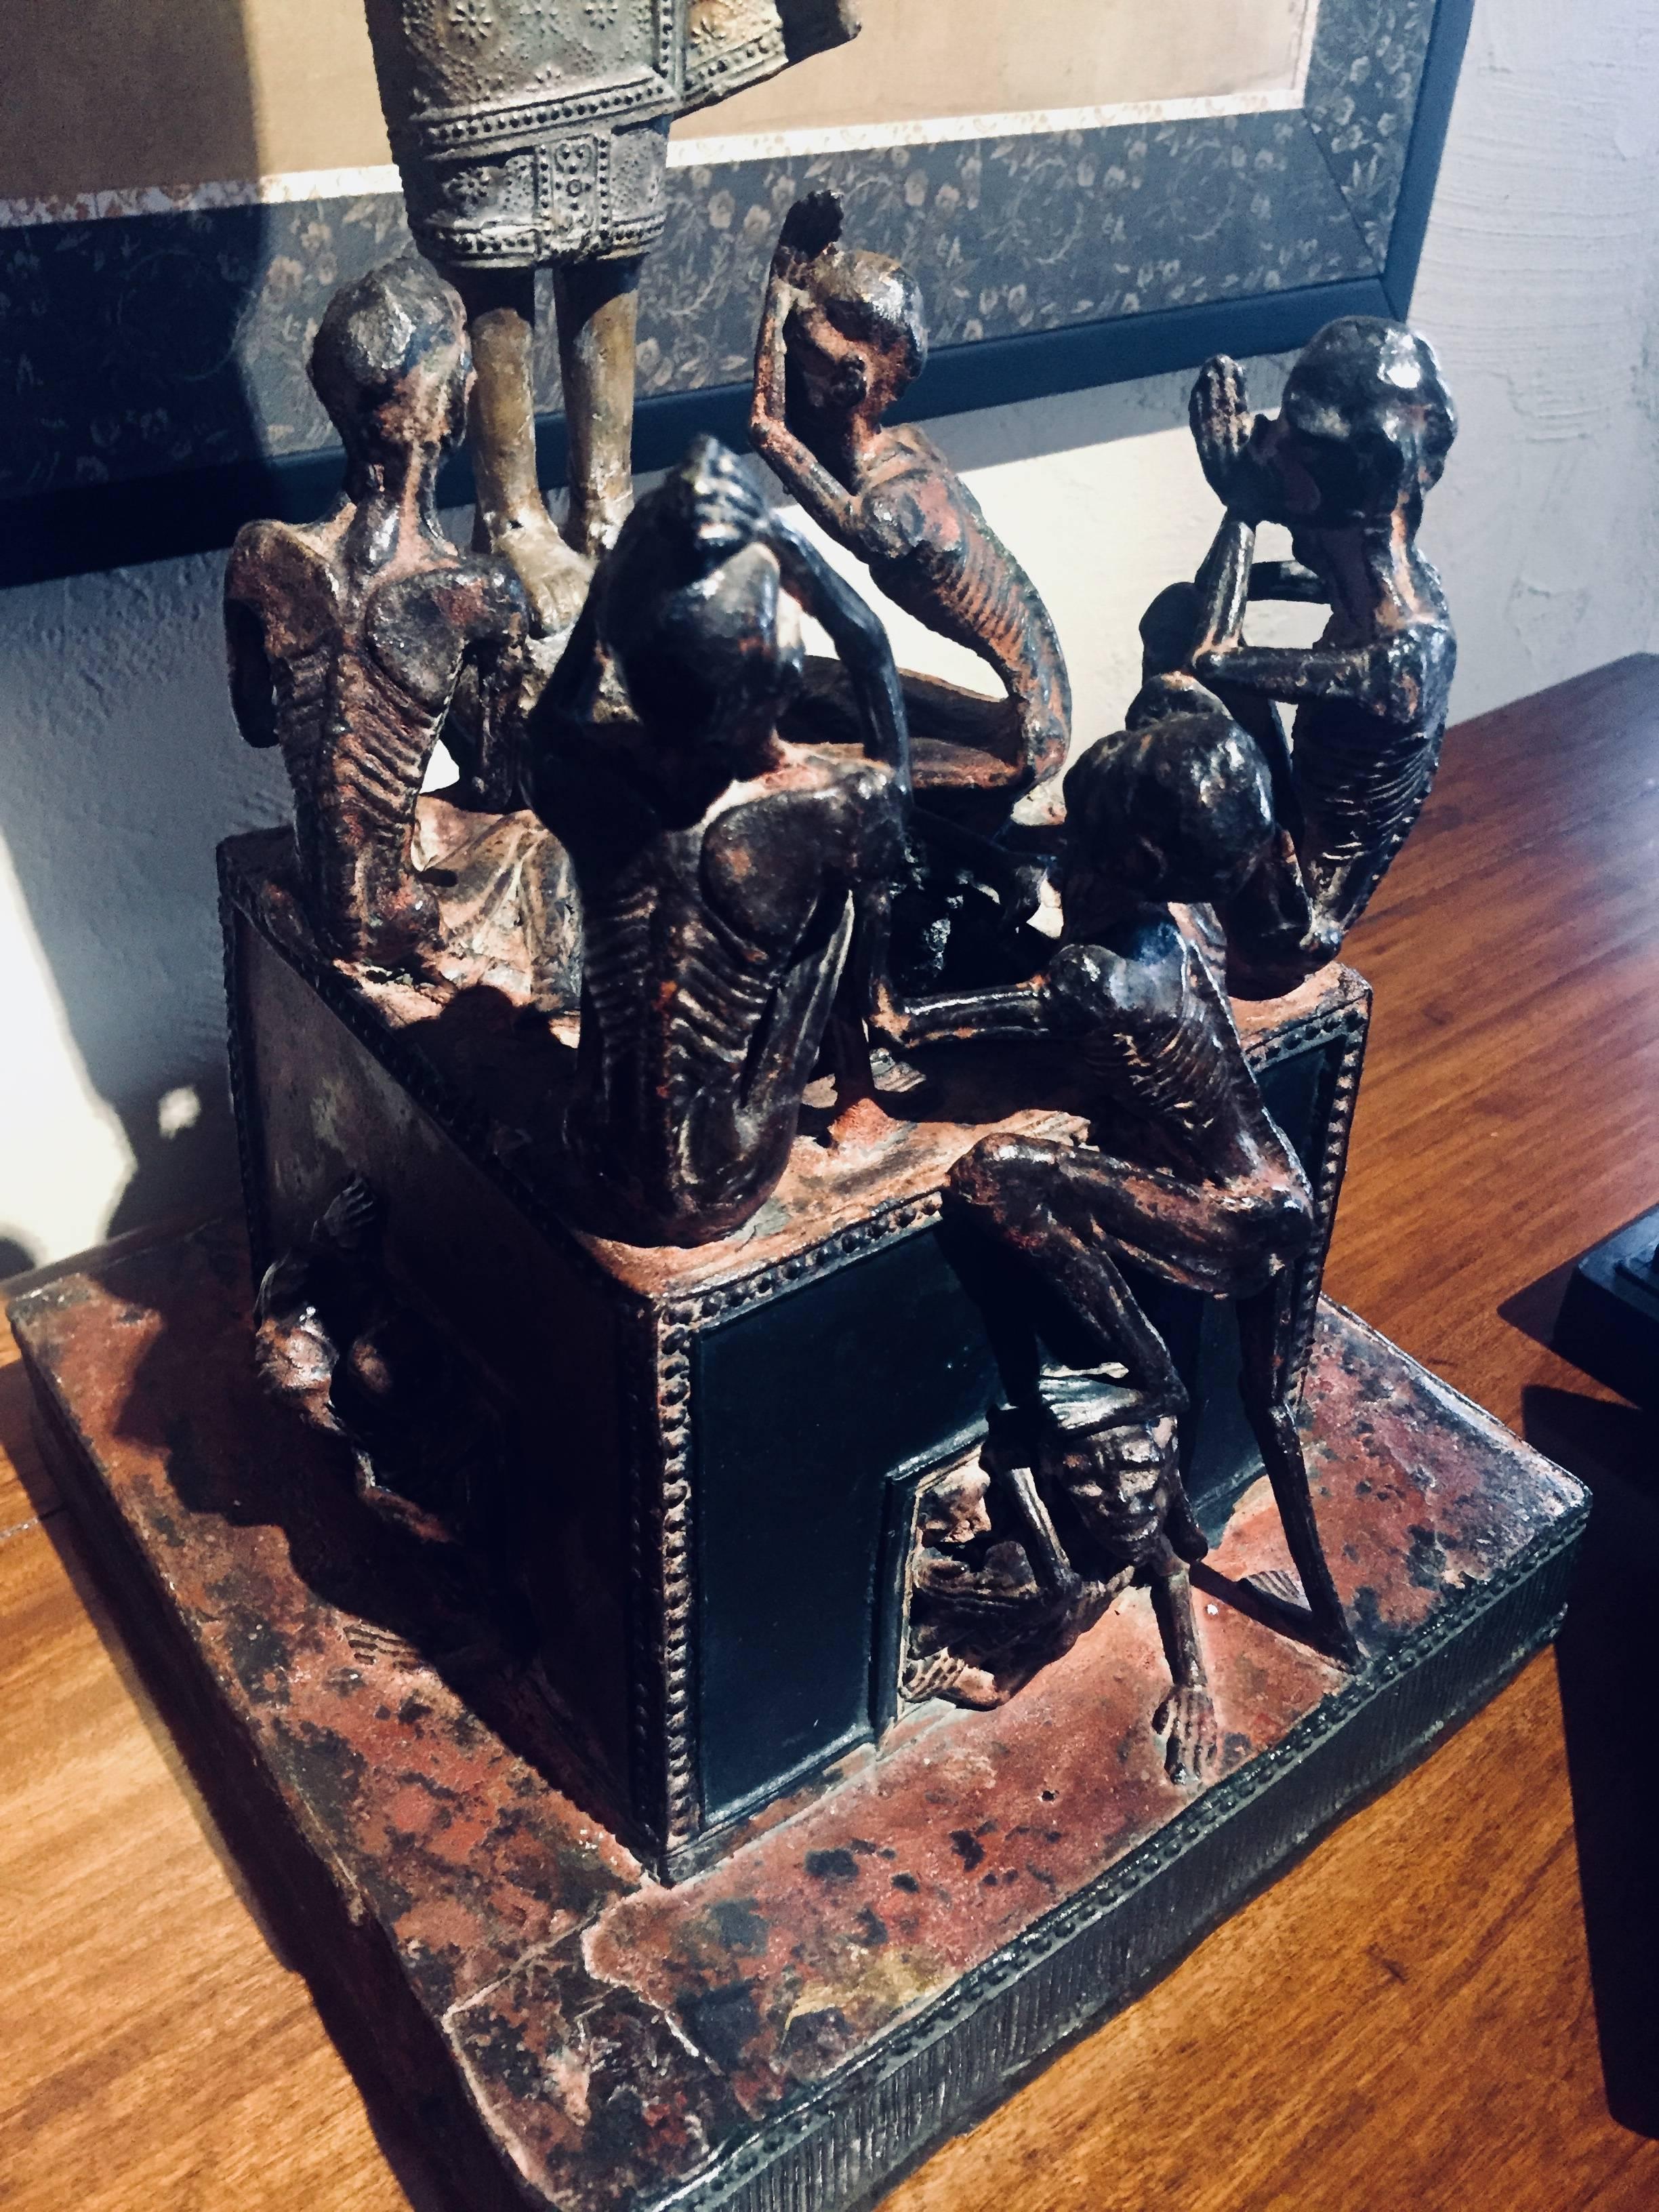 An intriguing bronze sculpture. A Buddhist Monk, Phra Malai is depicted in his journey to hell.

The legend of Phra Malai, a Buddhist monk of the Theravada tradition said to have attained supernatural powers through his accumulated merit and